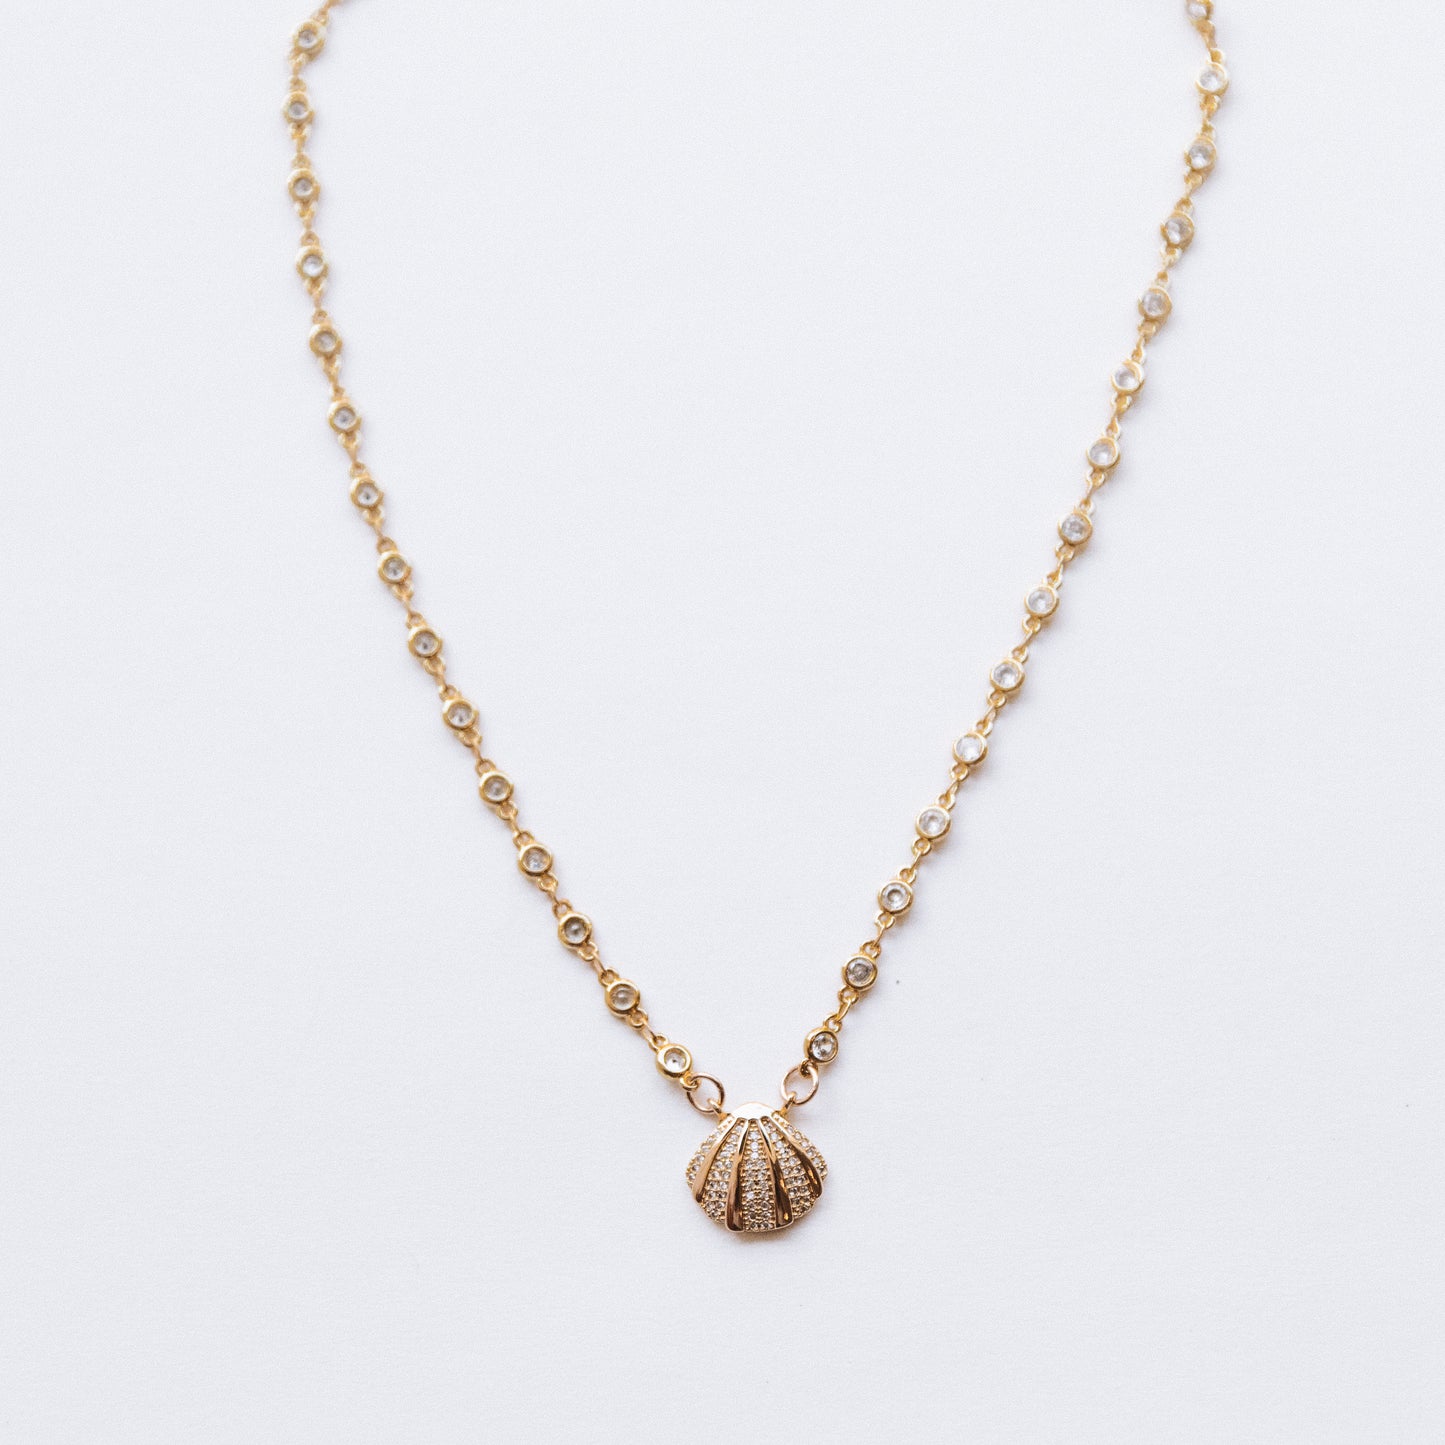 The Crystal Shell Necklace